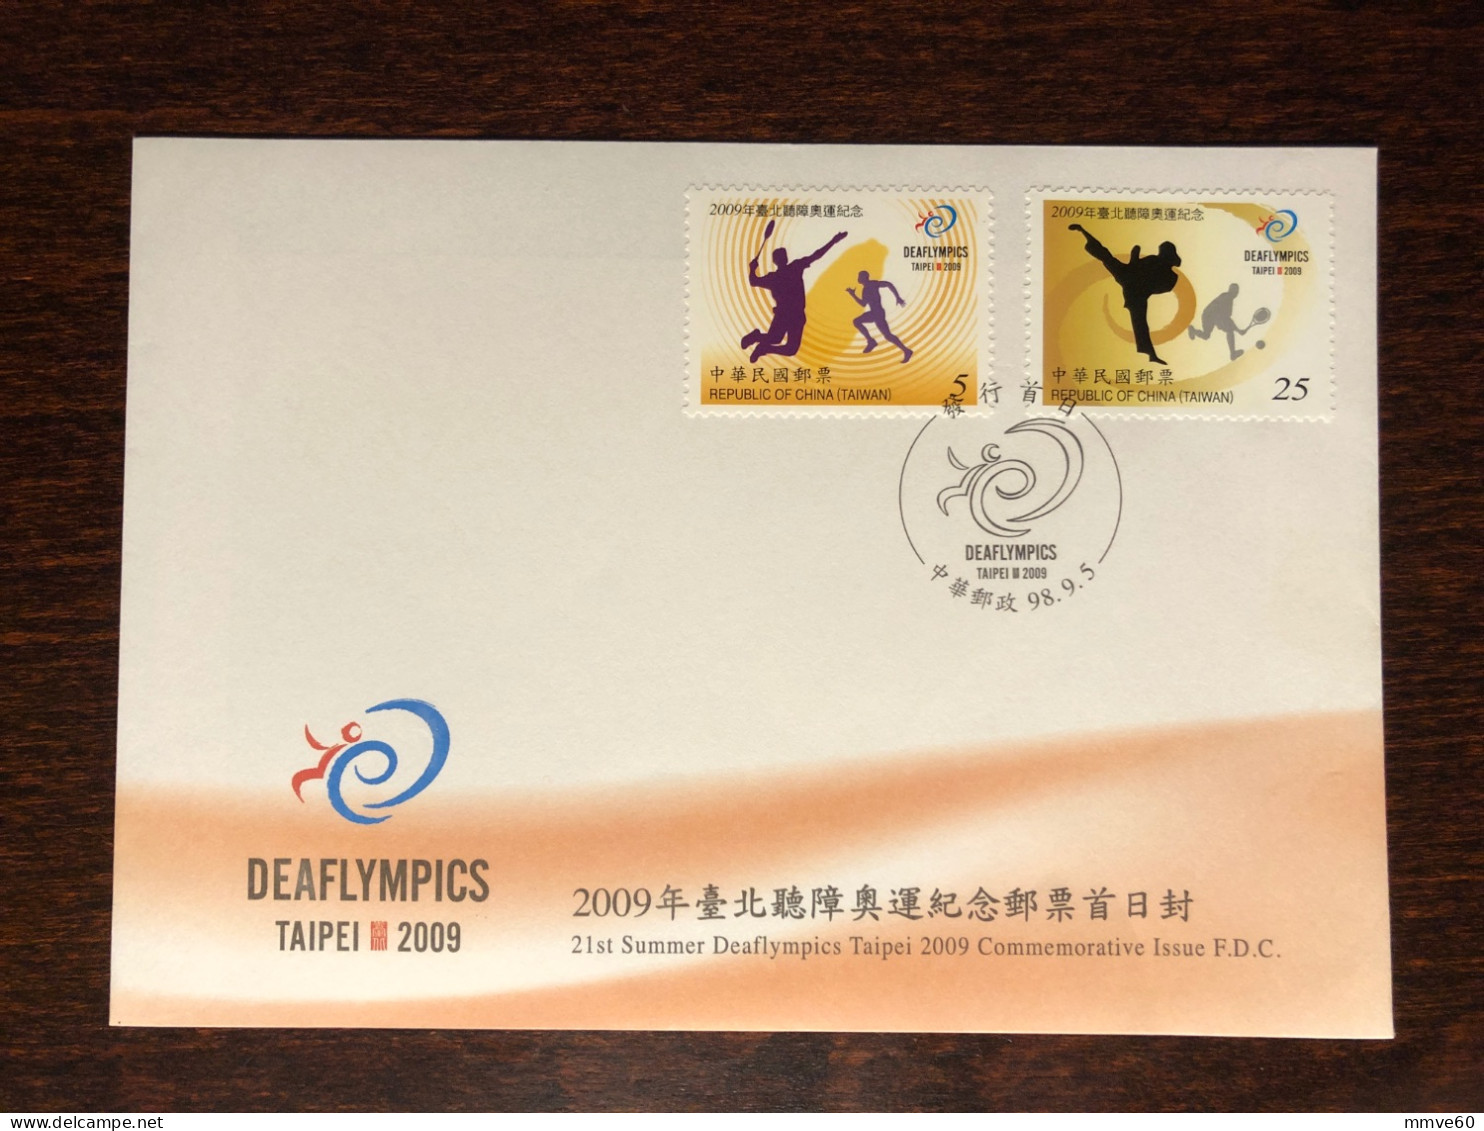 TAIWAN ROC FDC COVER 2009 YEAR DEAFLYMPICS SPORTS FOR DEAF PEOPLE HEALTH MEDICINE STAMPS - FDC